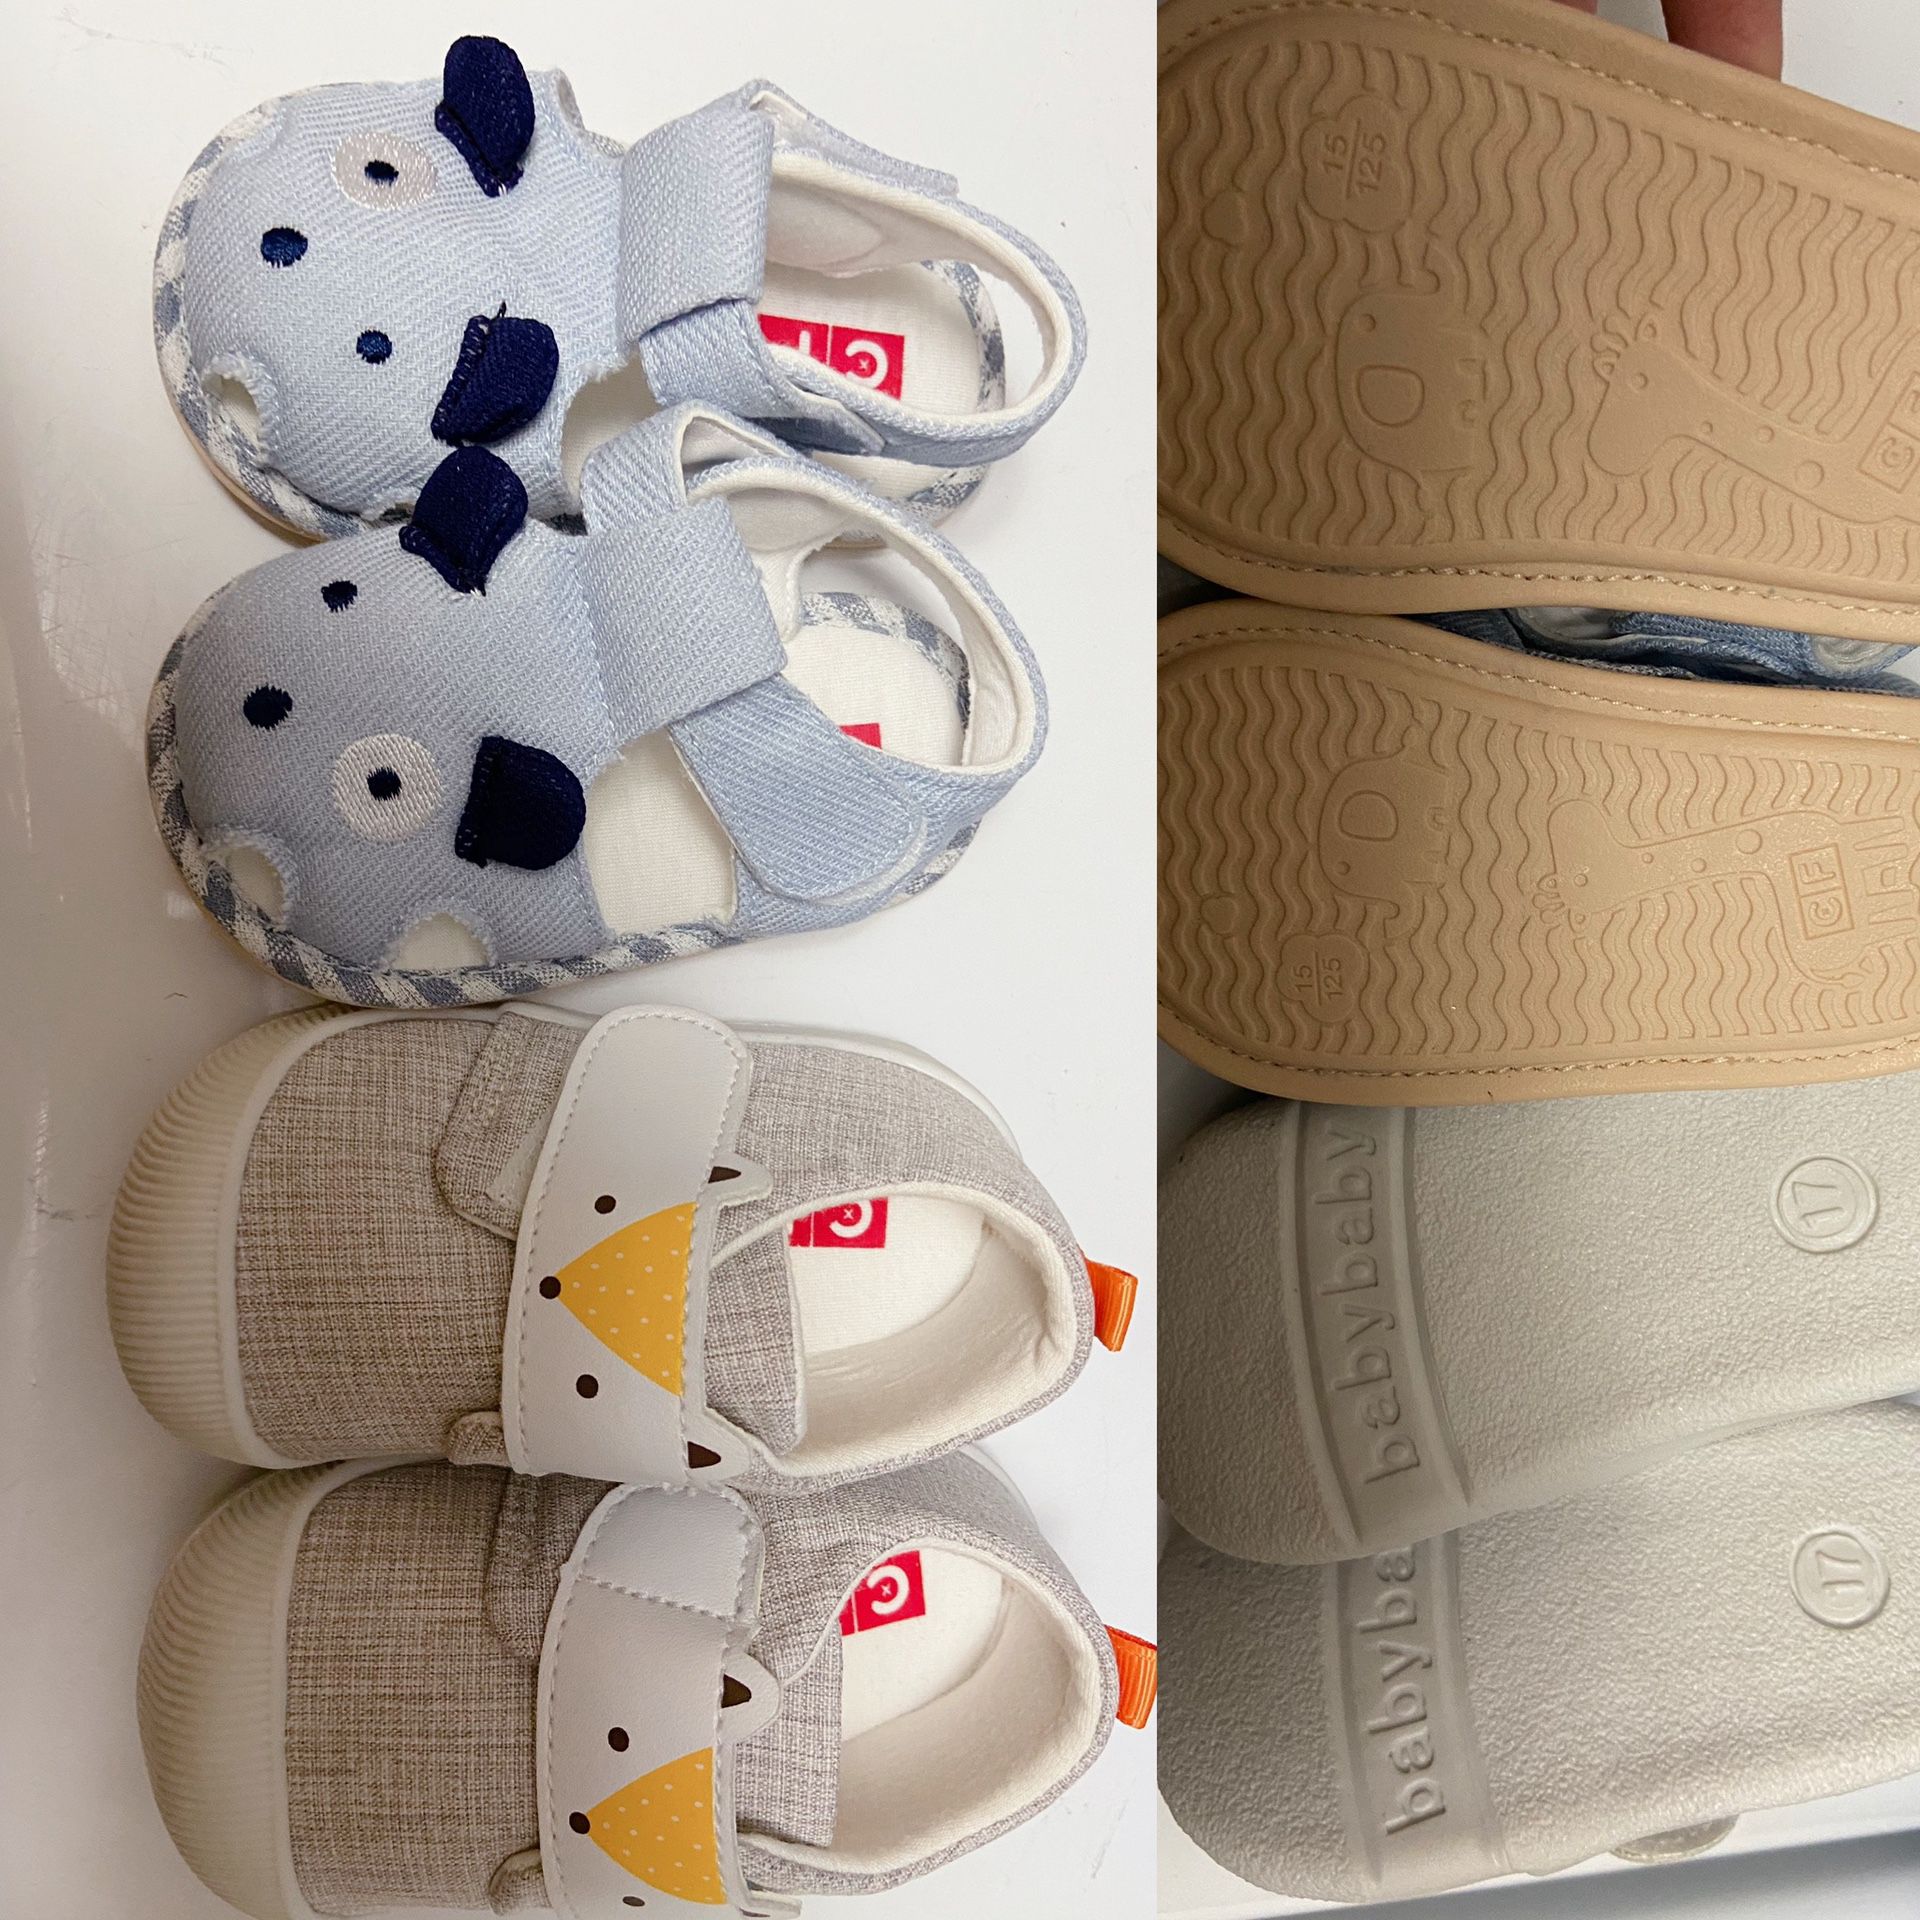 100% NEW ! First shoes- New Walkers- lightweight, flexible non-slip soles which will help your baby grip the ground.